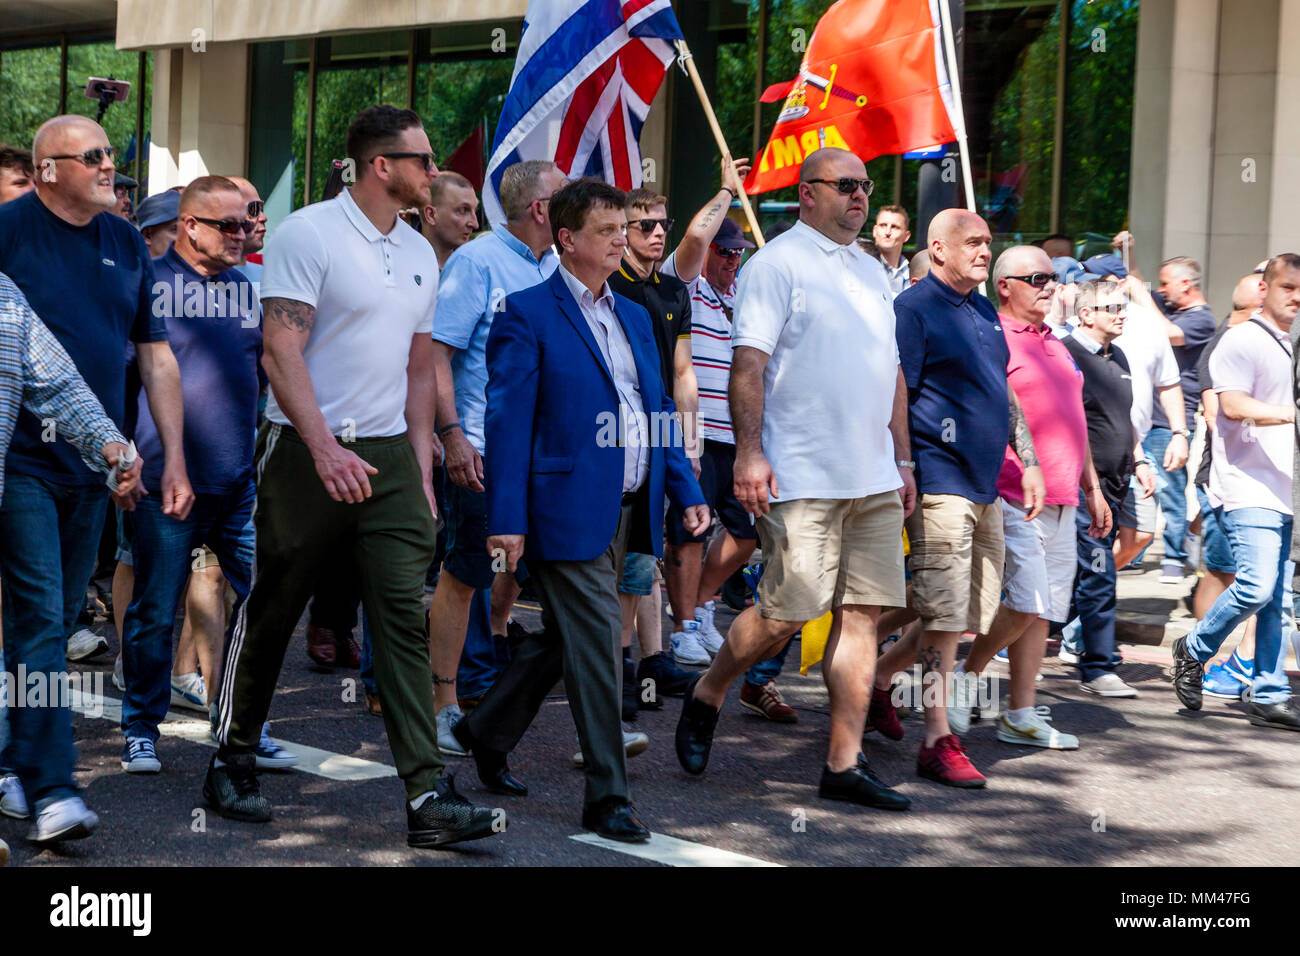 New UKIP leader Gerard Batten takes part in a march from Hyde Park to Whitehall to attend a freedom of speech rally, London, UK Stock Photo